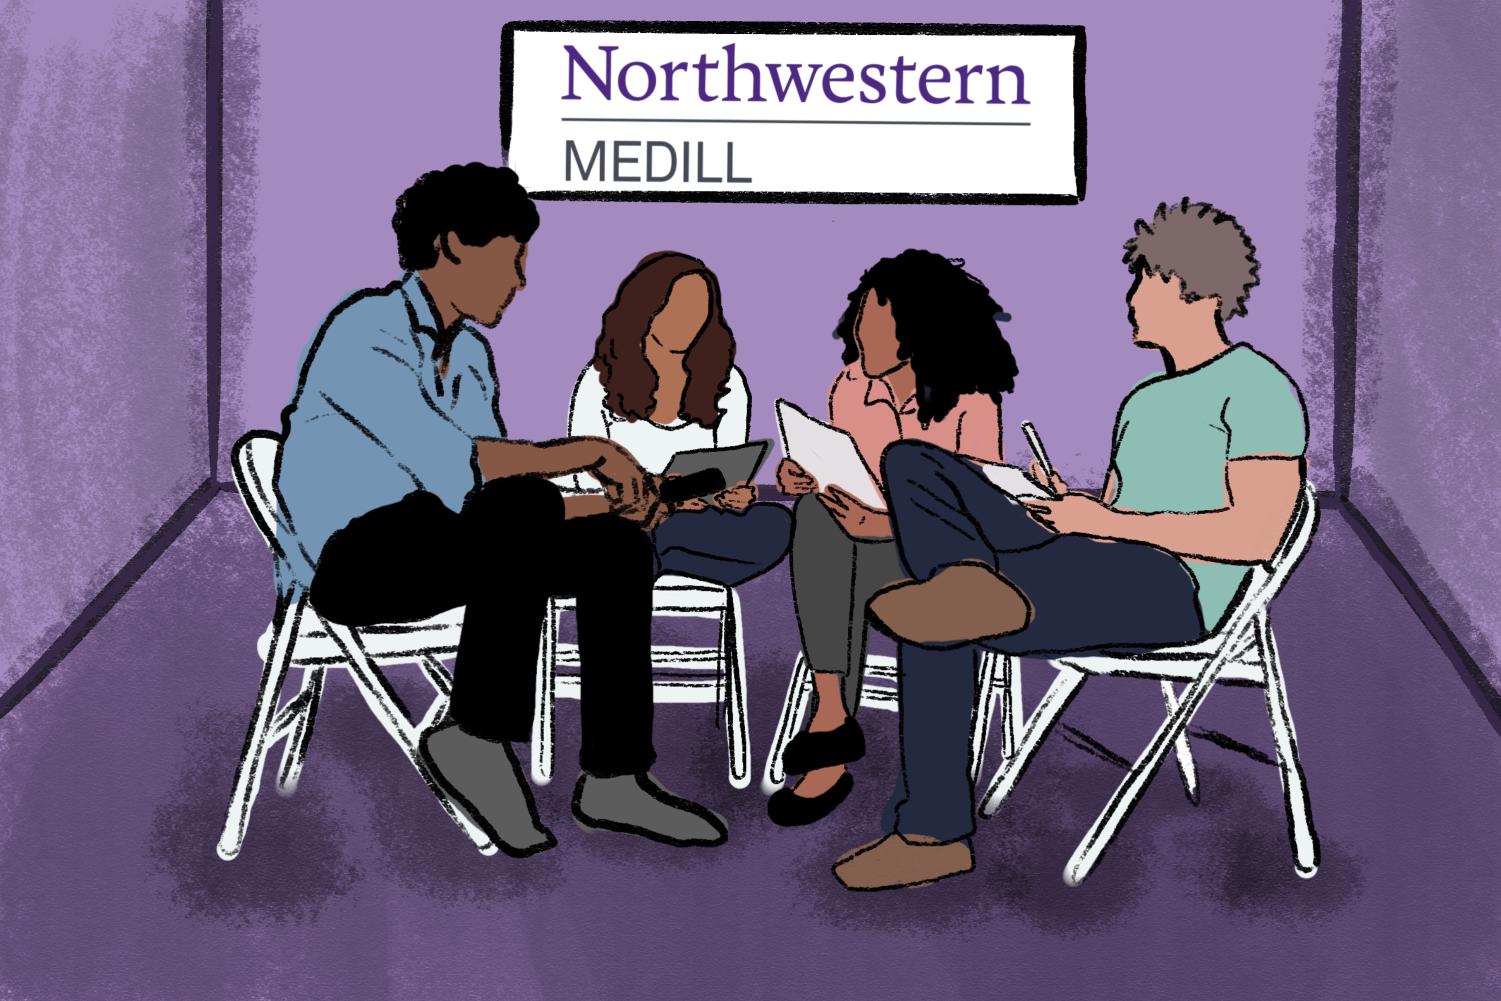 A+group+of+four+people+sit+on+folding+chairs+talking.+A+sign+above+them+says+%E2%80%9CNorthwestern+Medill.%E2%80%9D